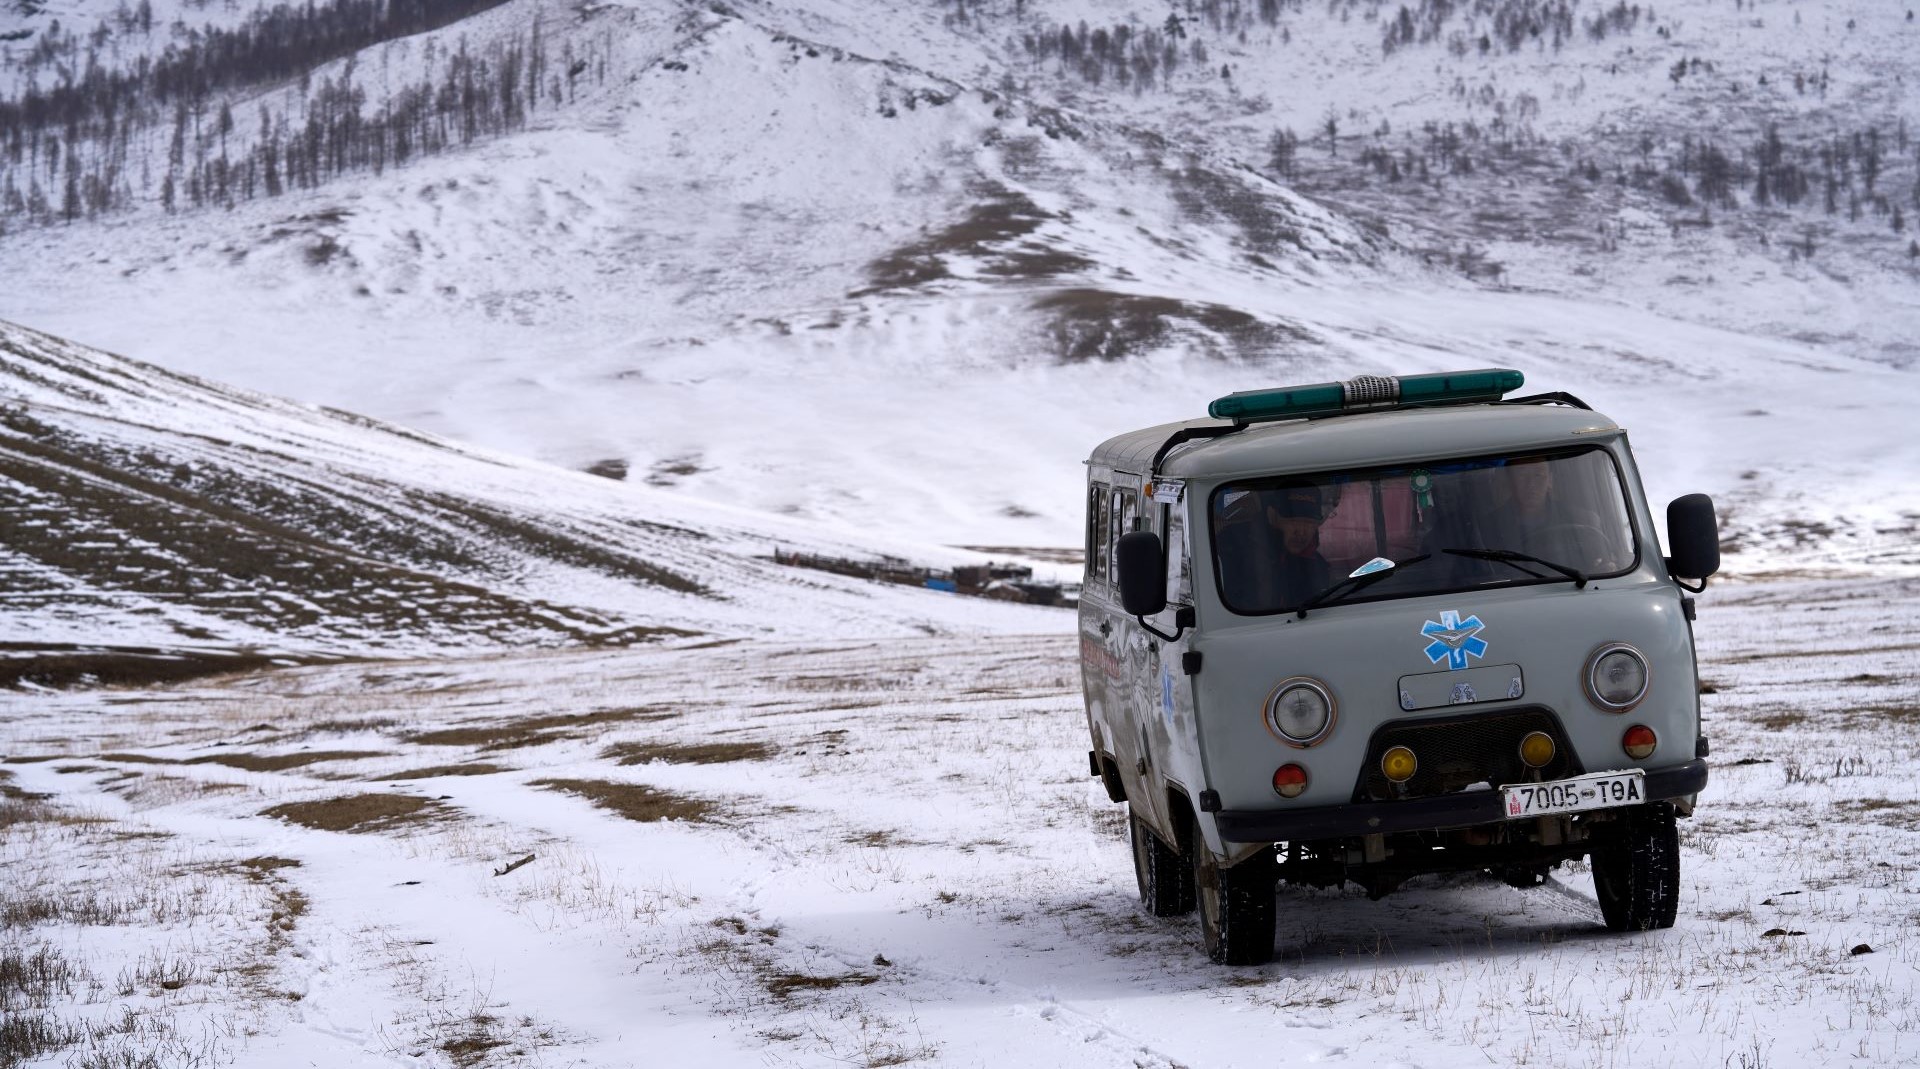 An ambulance in Mongolia drives through snow